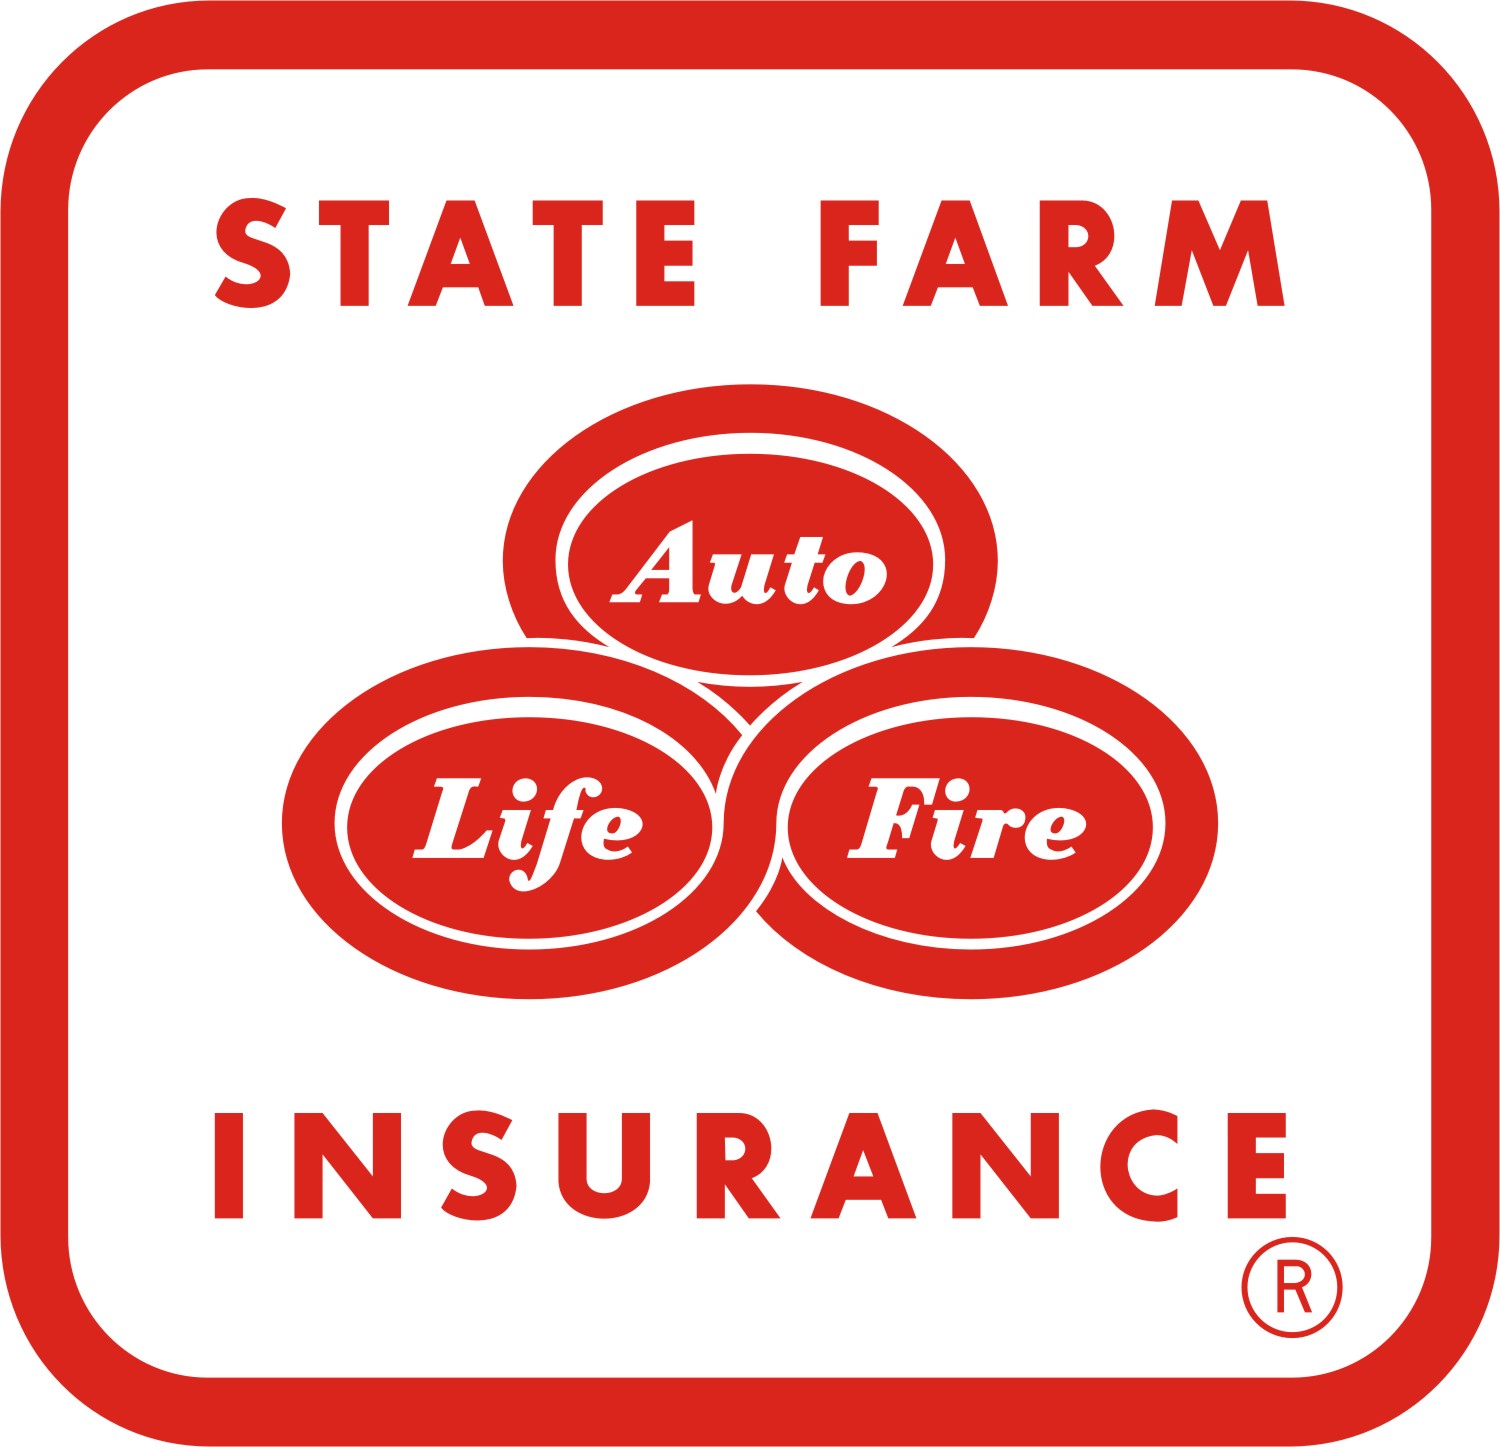 Bruce Oyler - State Farm Insurance Agent Outlines An Insurance Claim Process.